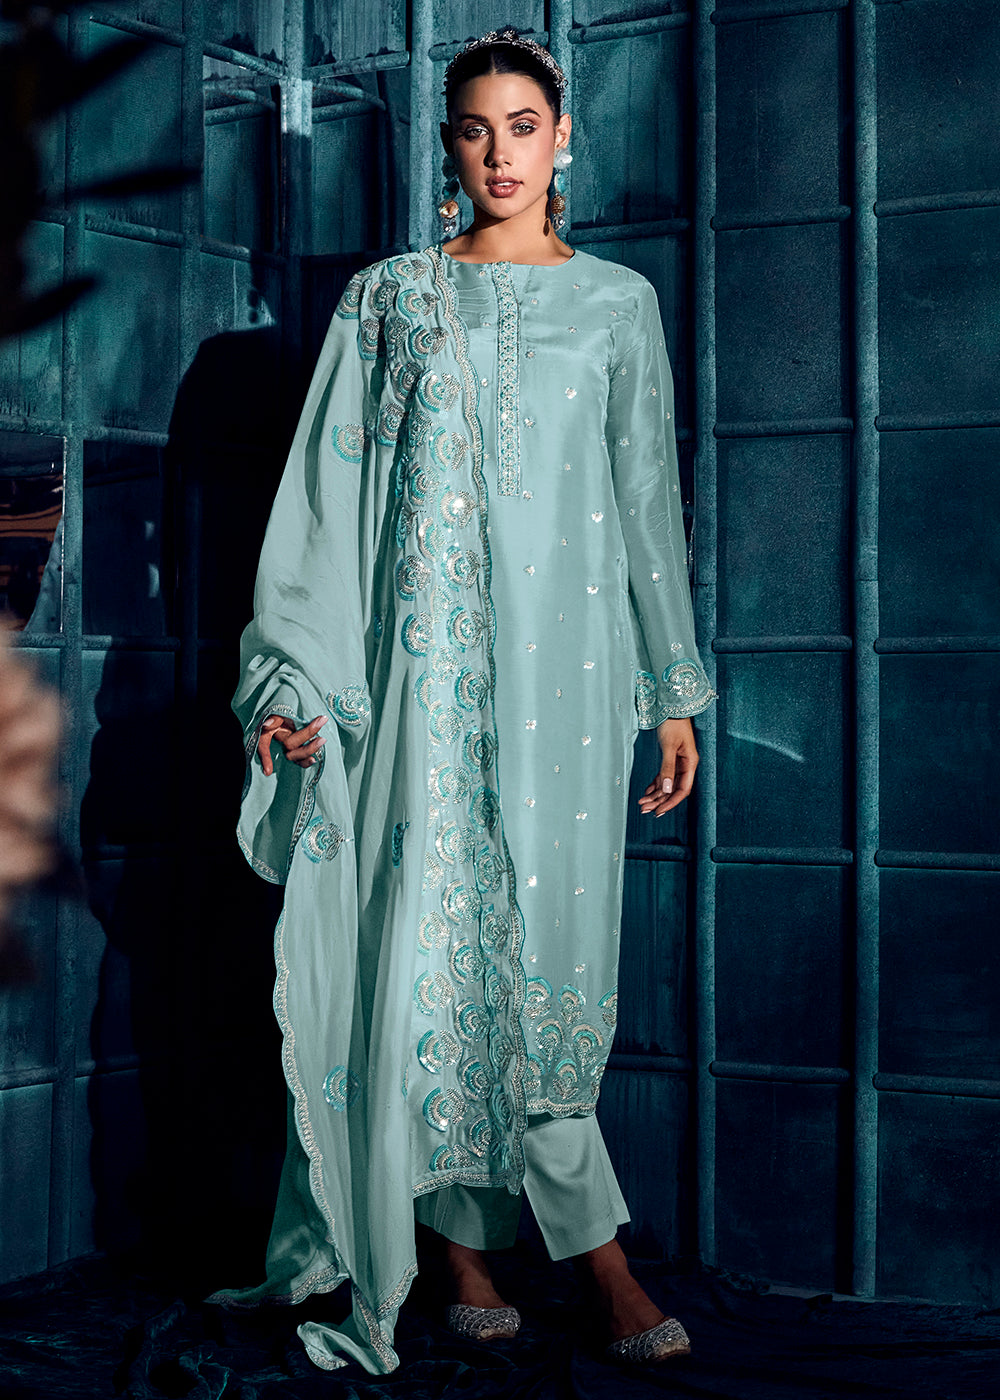 Buy Now Ice Blue Modale Silk Embroidered Festive Salwar Suit Online in USA, UK, Canada, Germany, Australia & Worldwide at Empress Clothing.